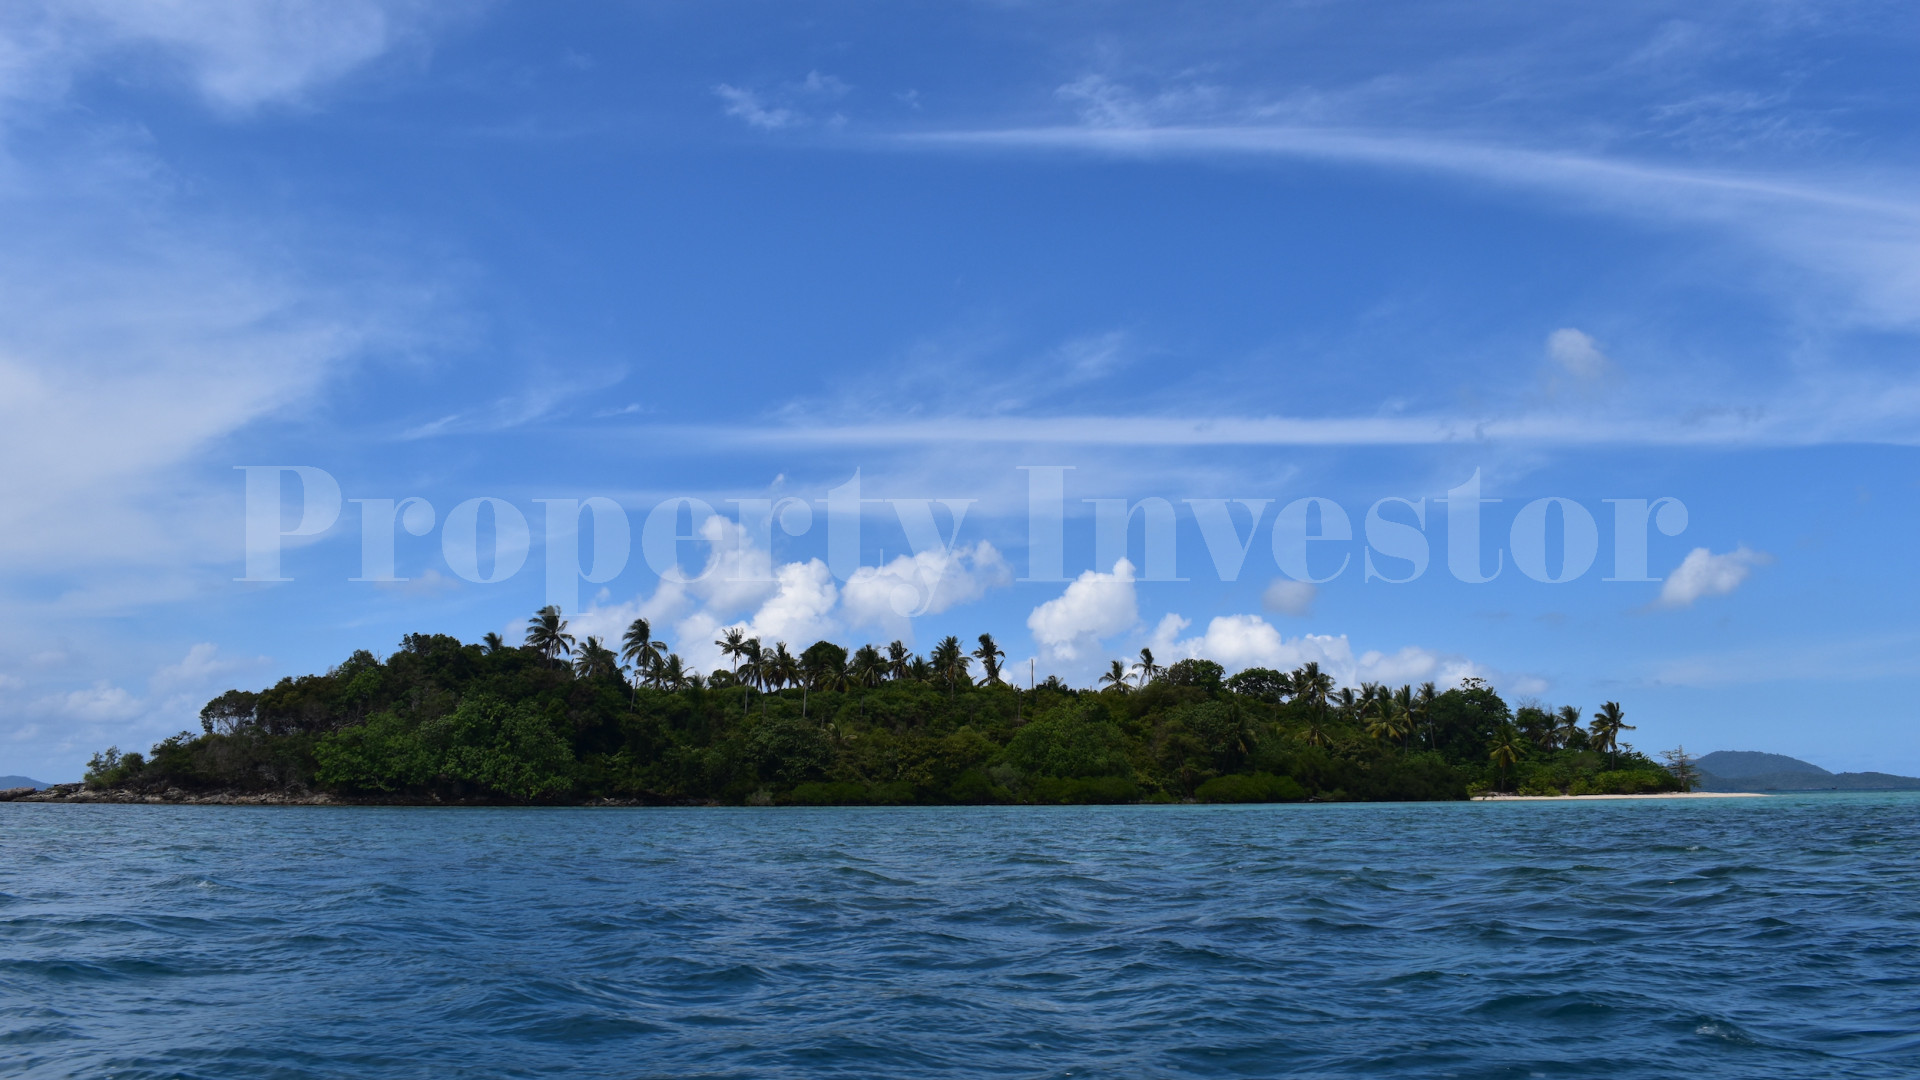 Exquisite 3.5 Hectare Virgin Island for Commercial Development in the Riau Islands, Indonesia